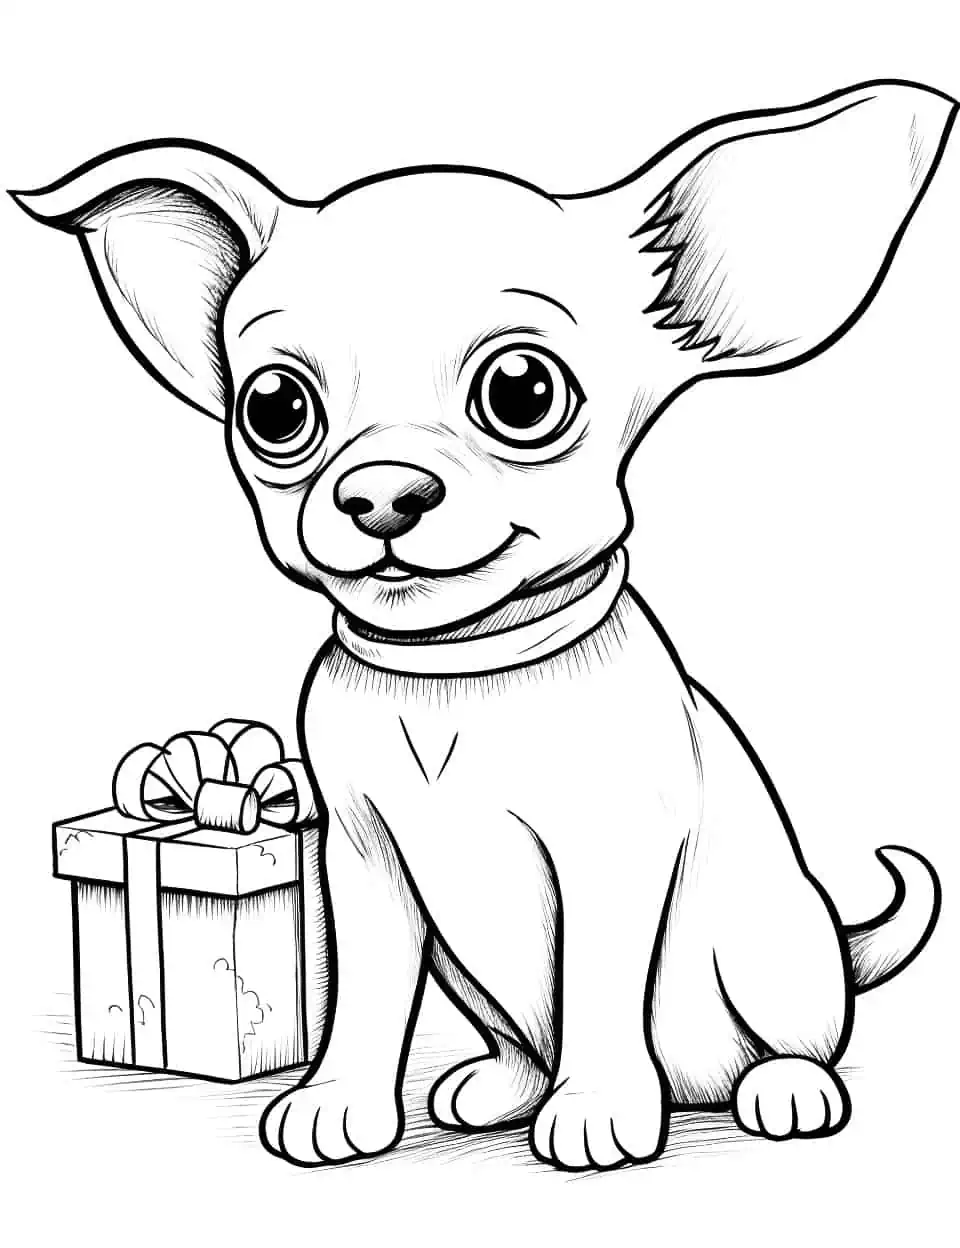 Christmas with a Chihuahua Dog Coloring Page - A chihuahua puppy opening a Christmas present.